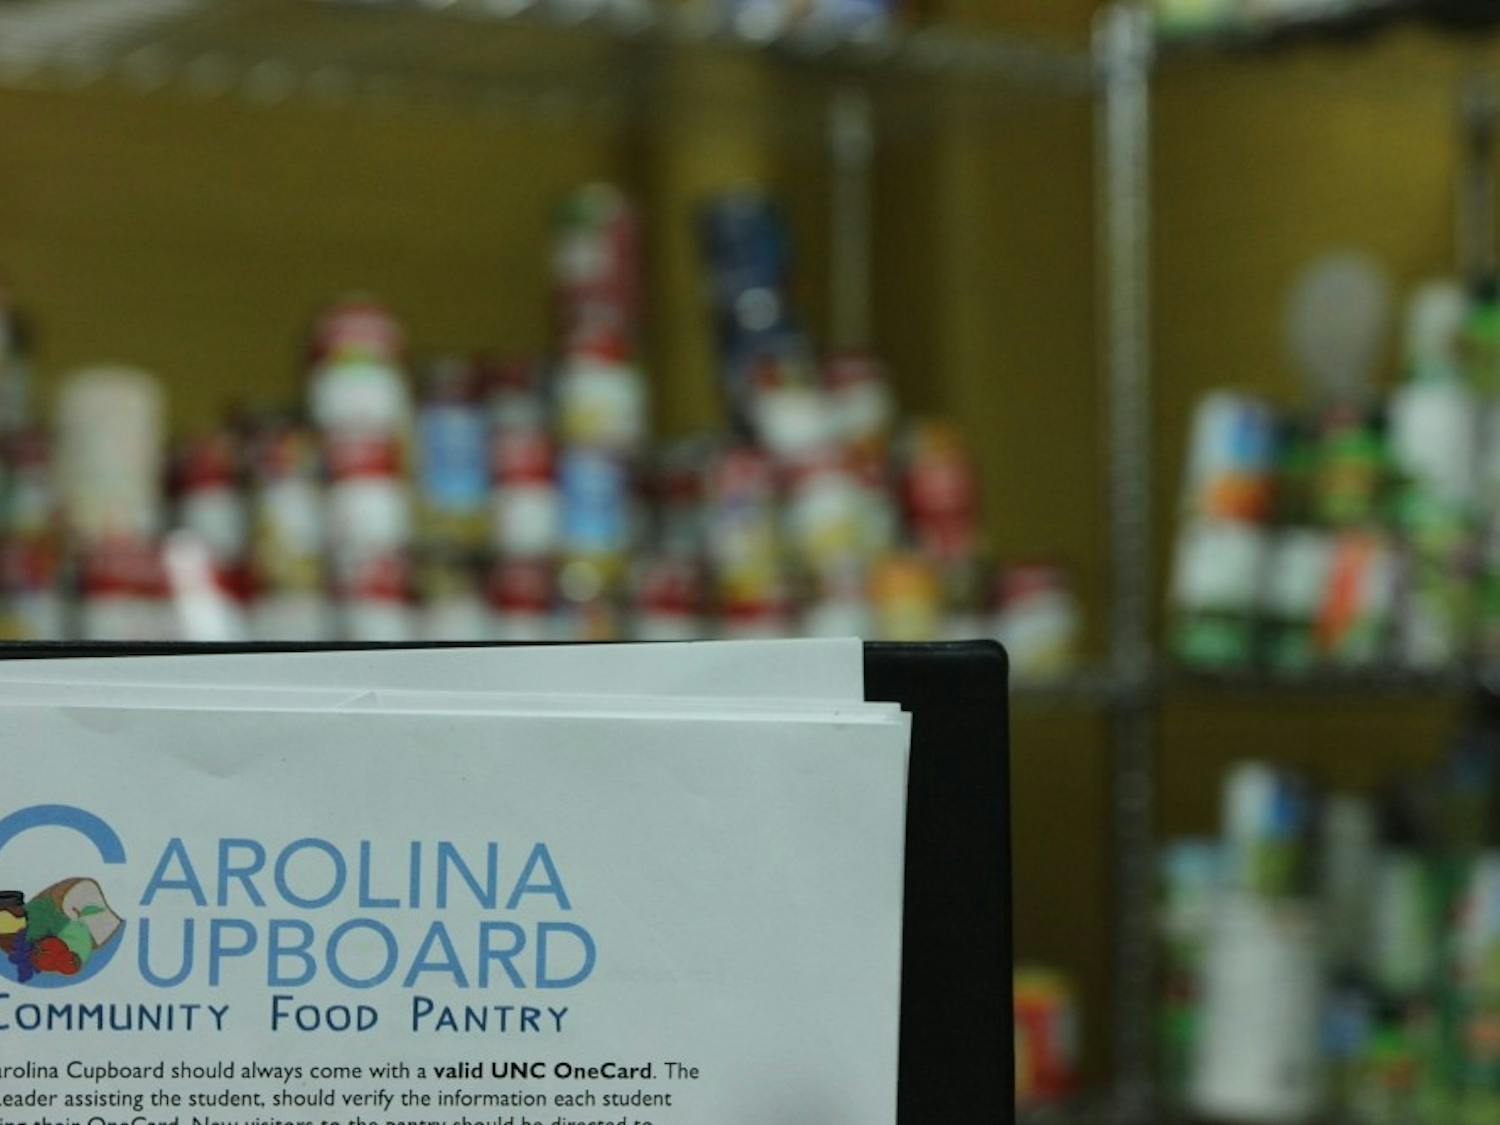 Carolina Cupboard is located in the basement of Avery Residence Hall and it is available for student access.